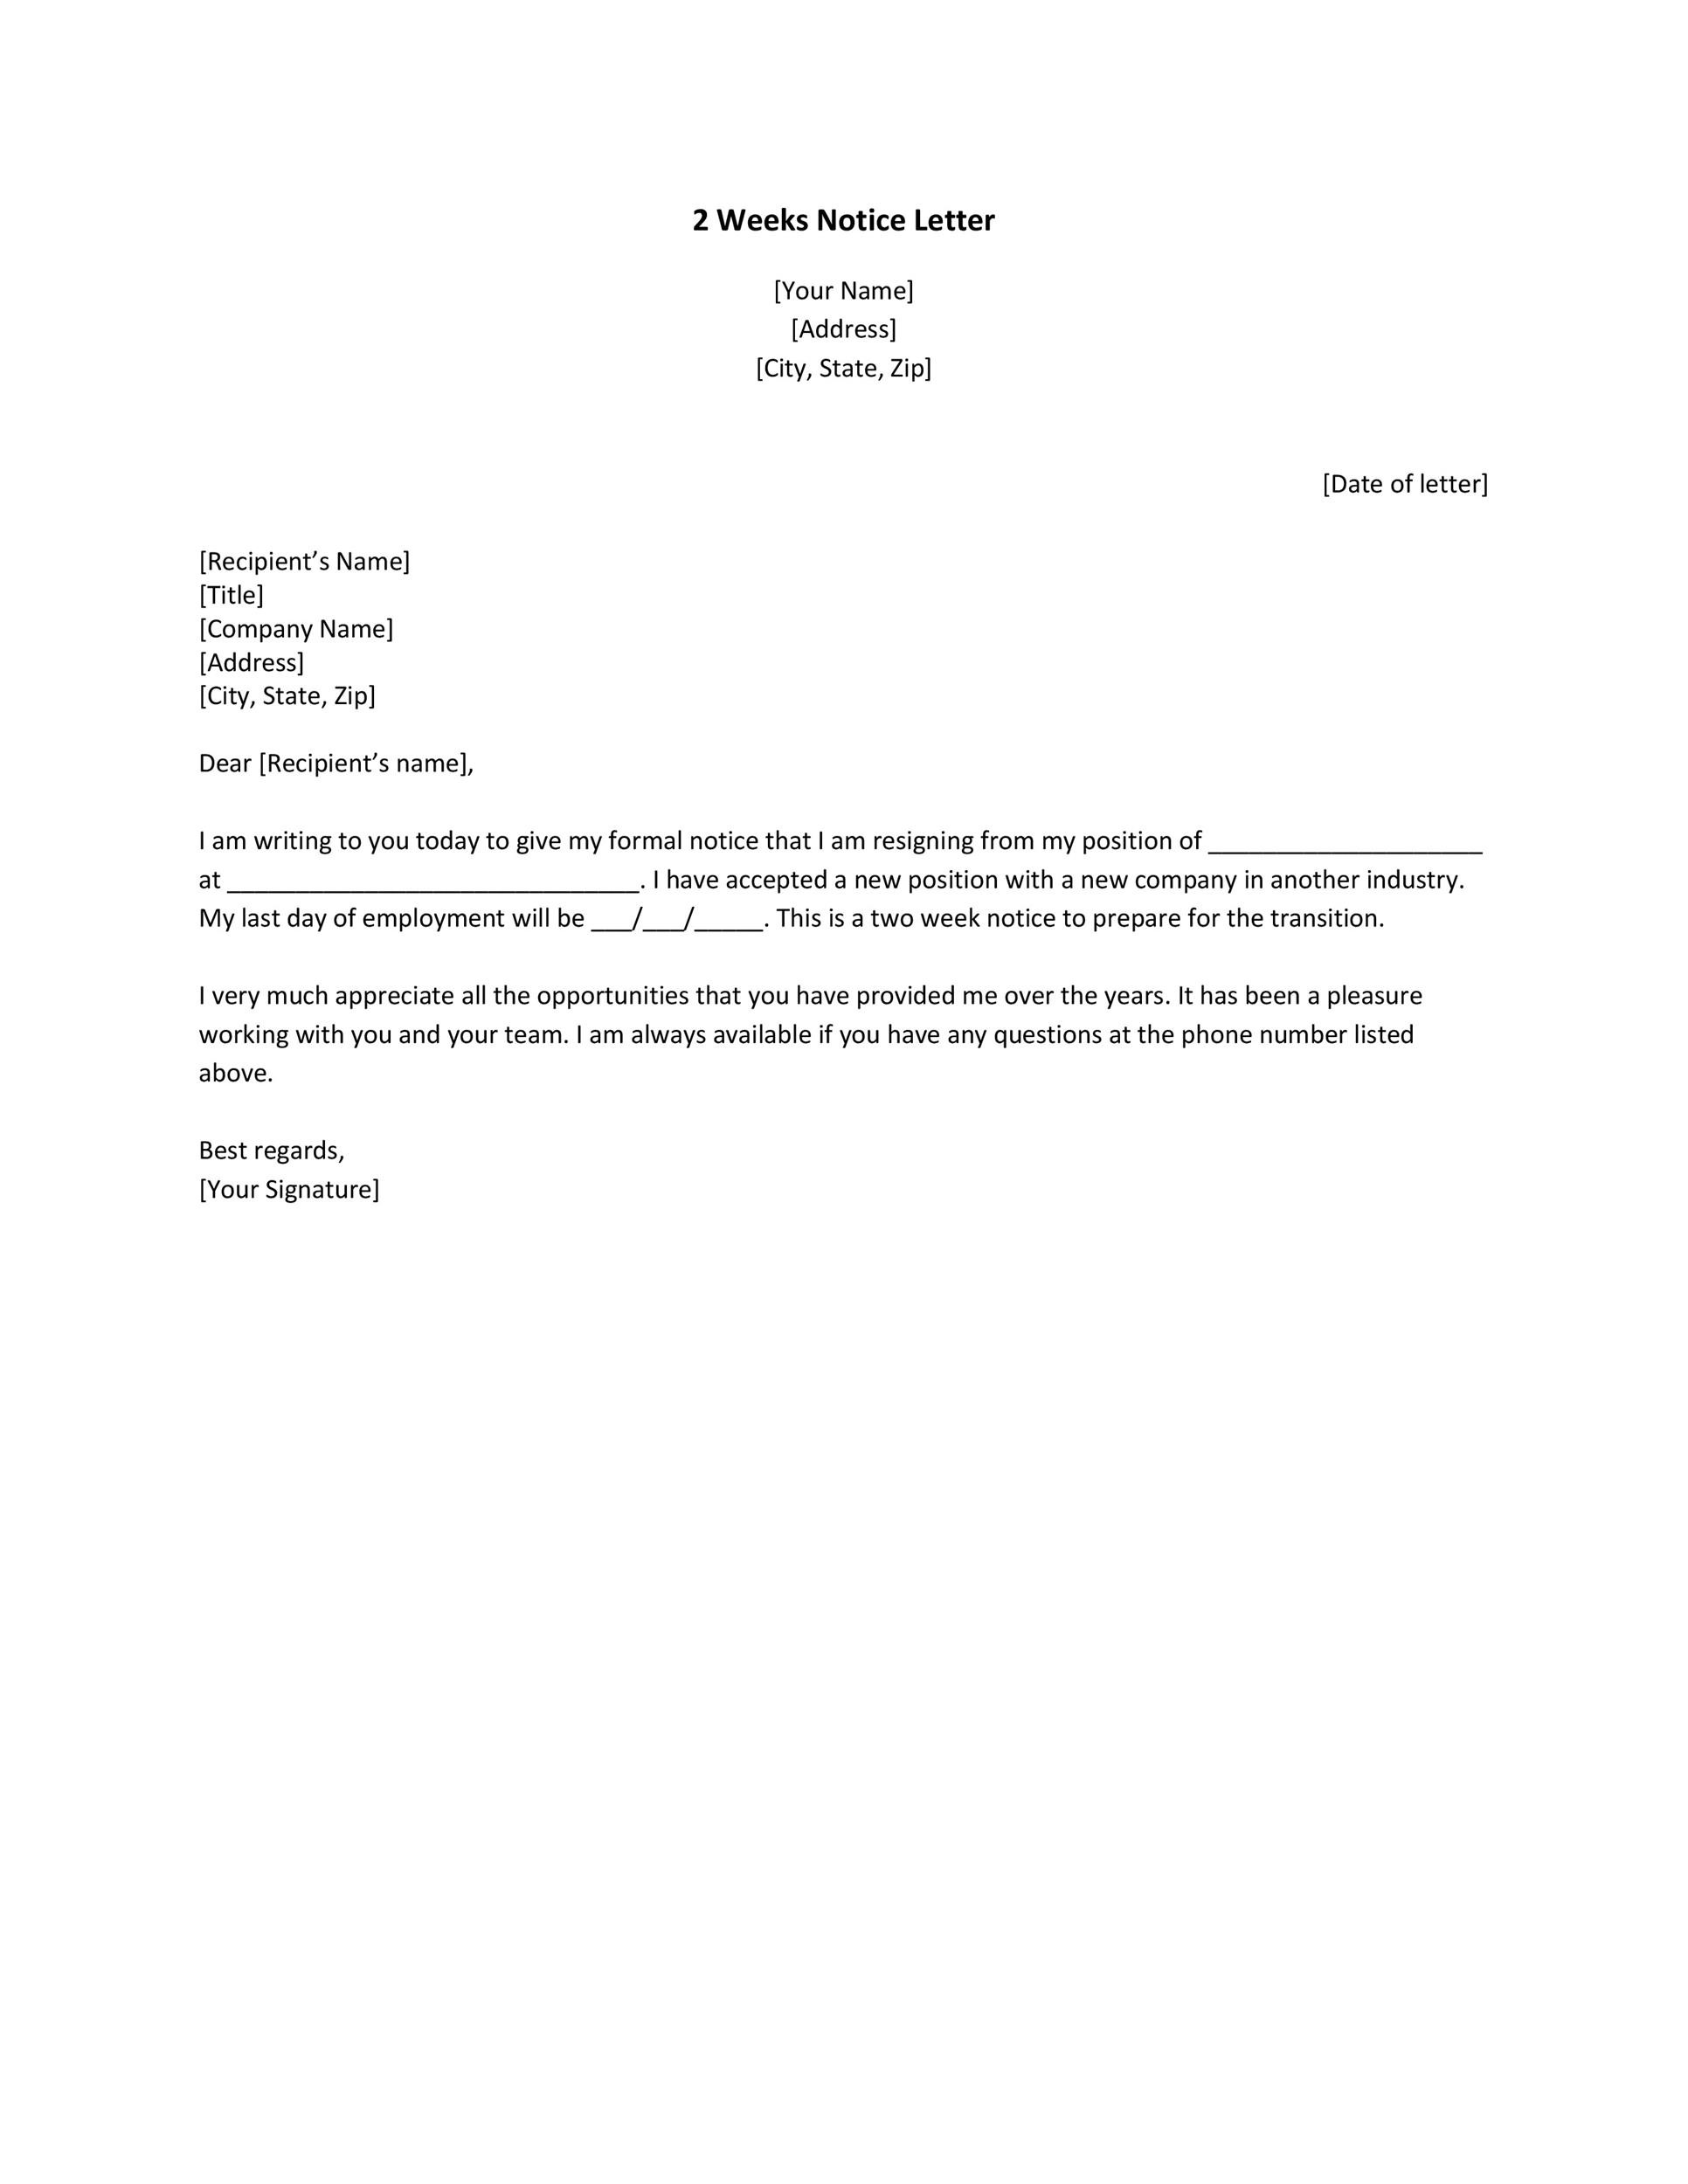 2 Weeks Notice Letter Examples from templatelab.com